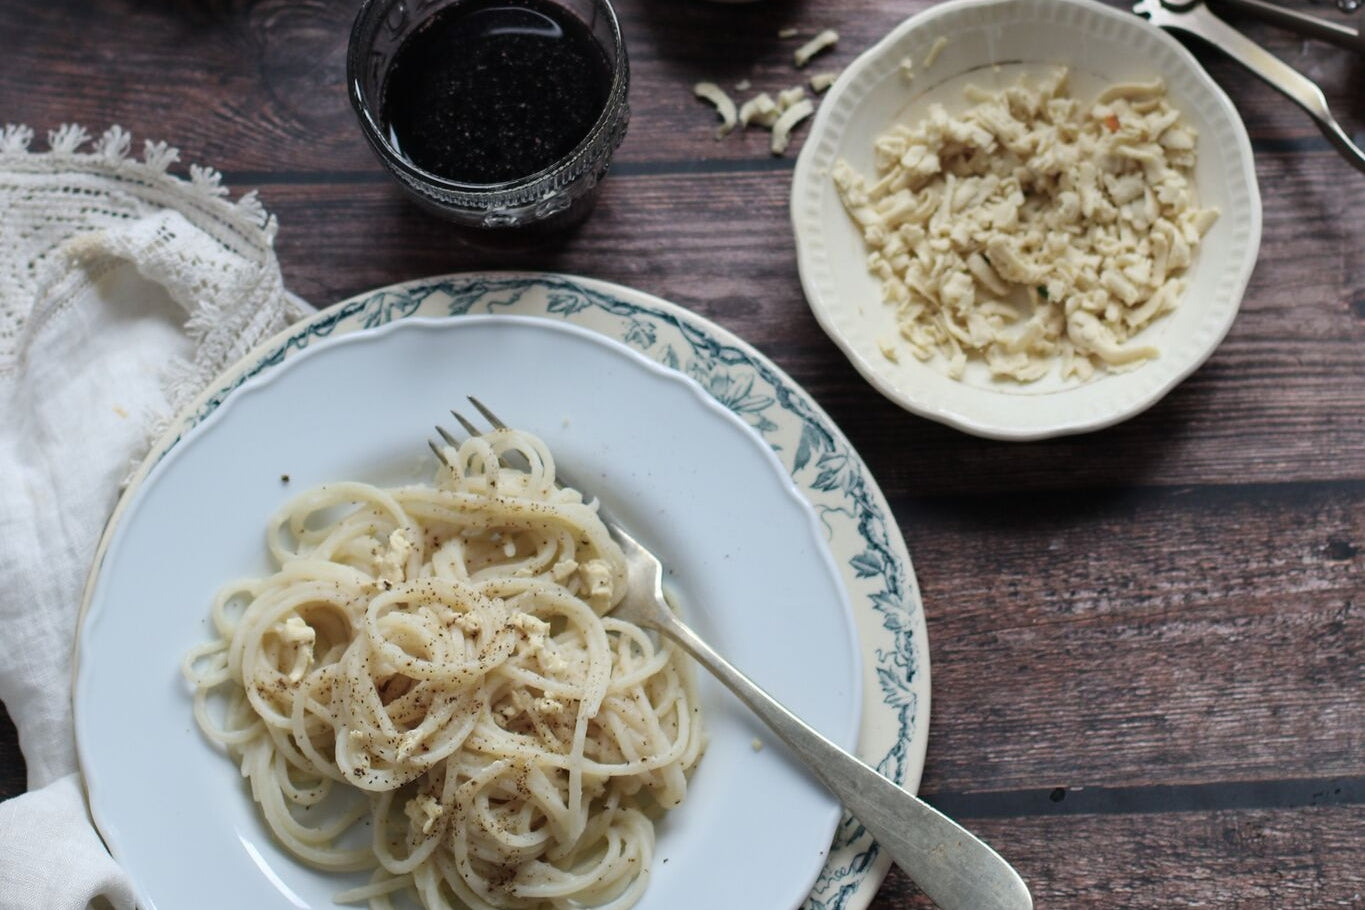 Bowl of vegan cacio e pepe noodles with dairy-free cauliflower sauce. Served next to a bowl of shredded dairy-free cheese.